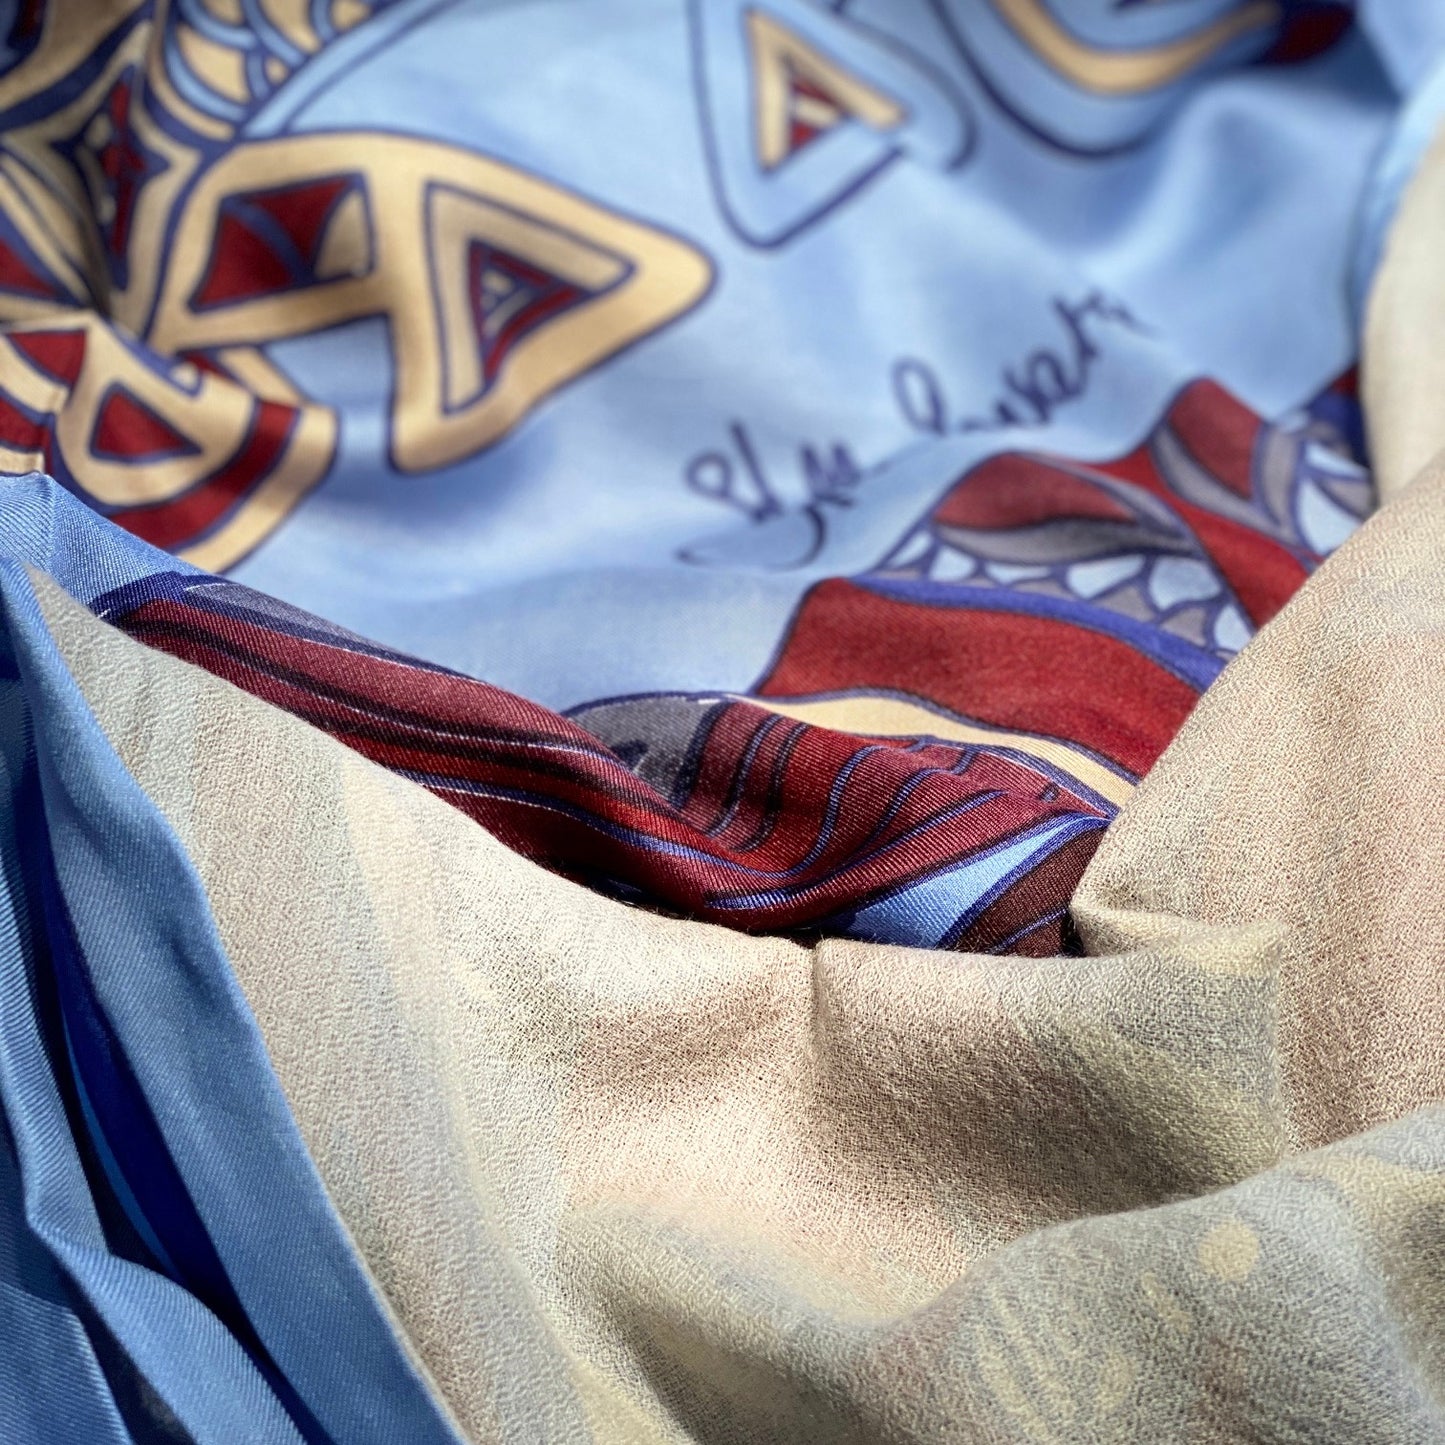 "WILD LIFE"- LIMITED EDITION #5 of 5 pieces - silk and cashmere scarf. Double face Maroon, burgundy on blue heaven. 